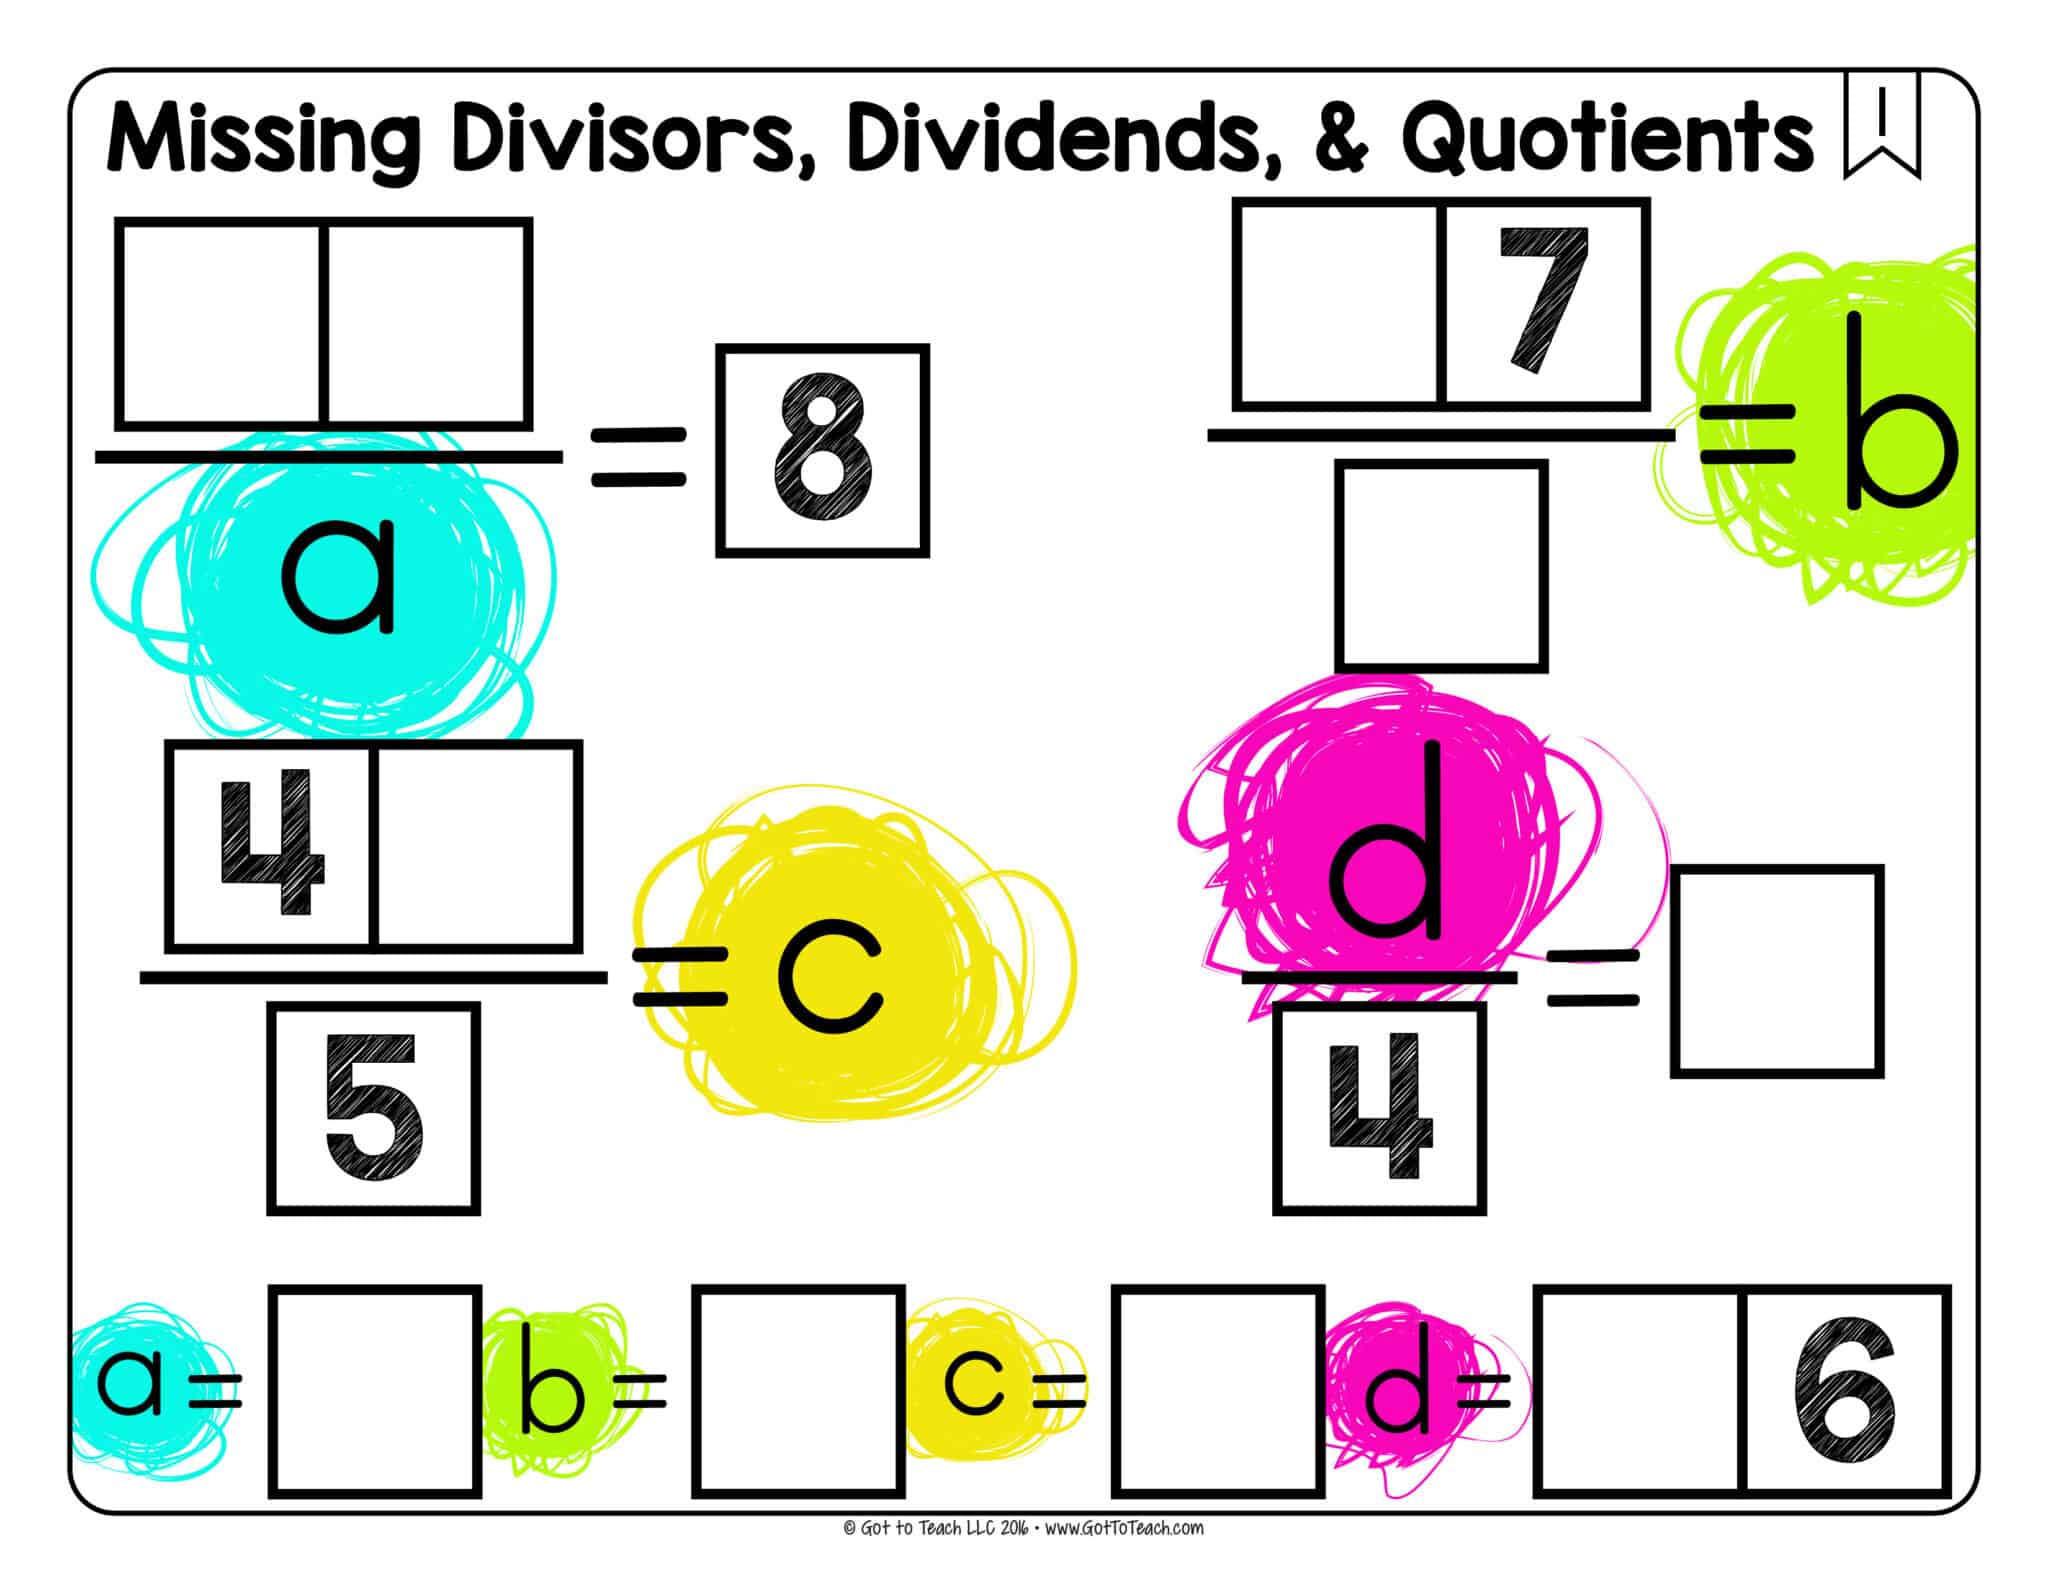 Missing Divisors, Dividends, and Quotients